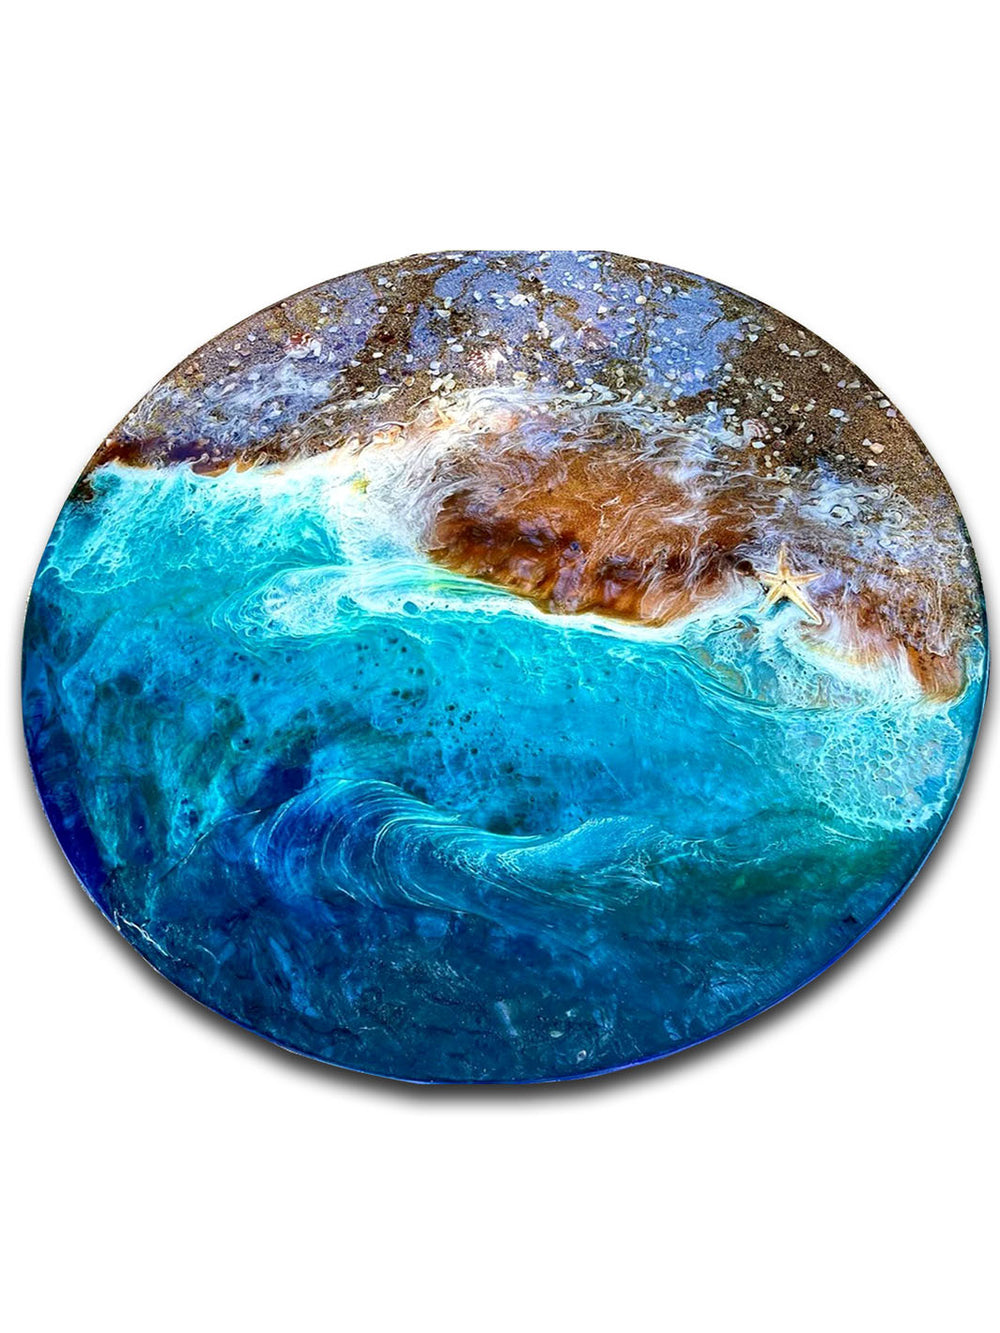 Handcrafted Ocean Inspired Rounded Coffee / Wine Table Artsheedal Kitchen & Dining Room Tables ART0227-1